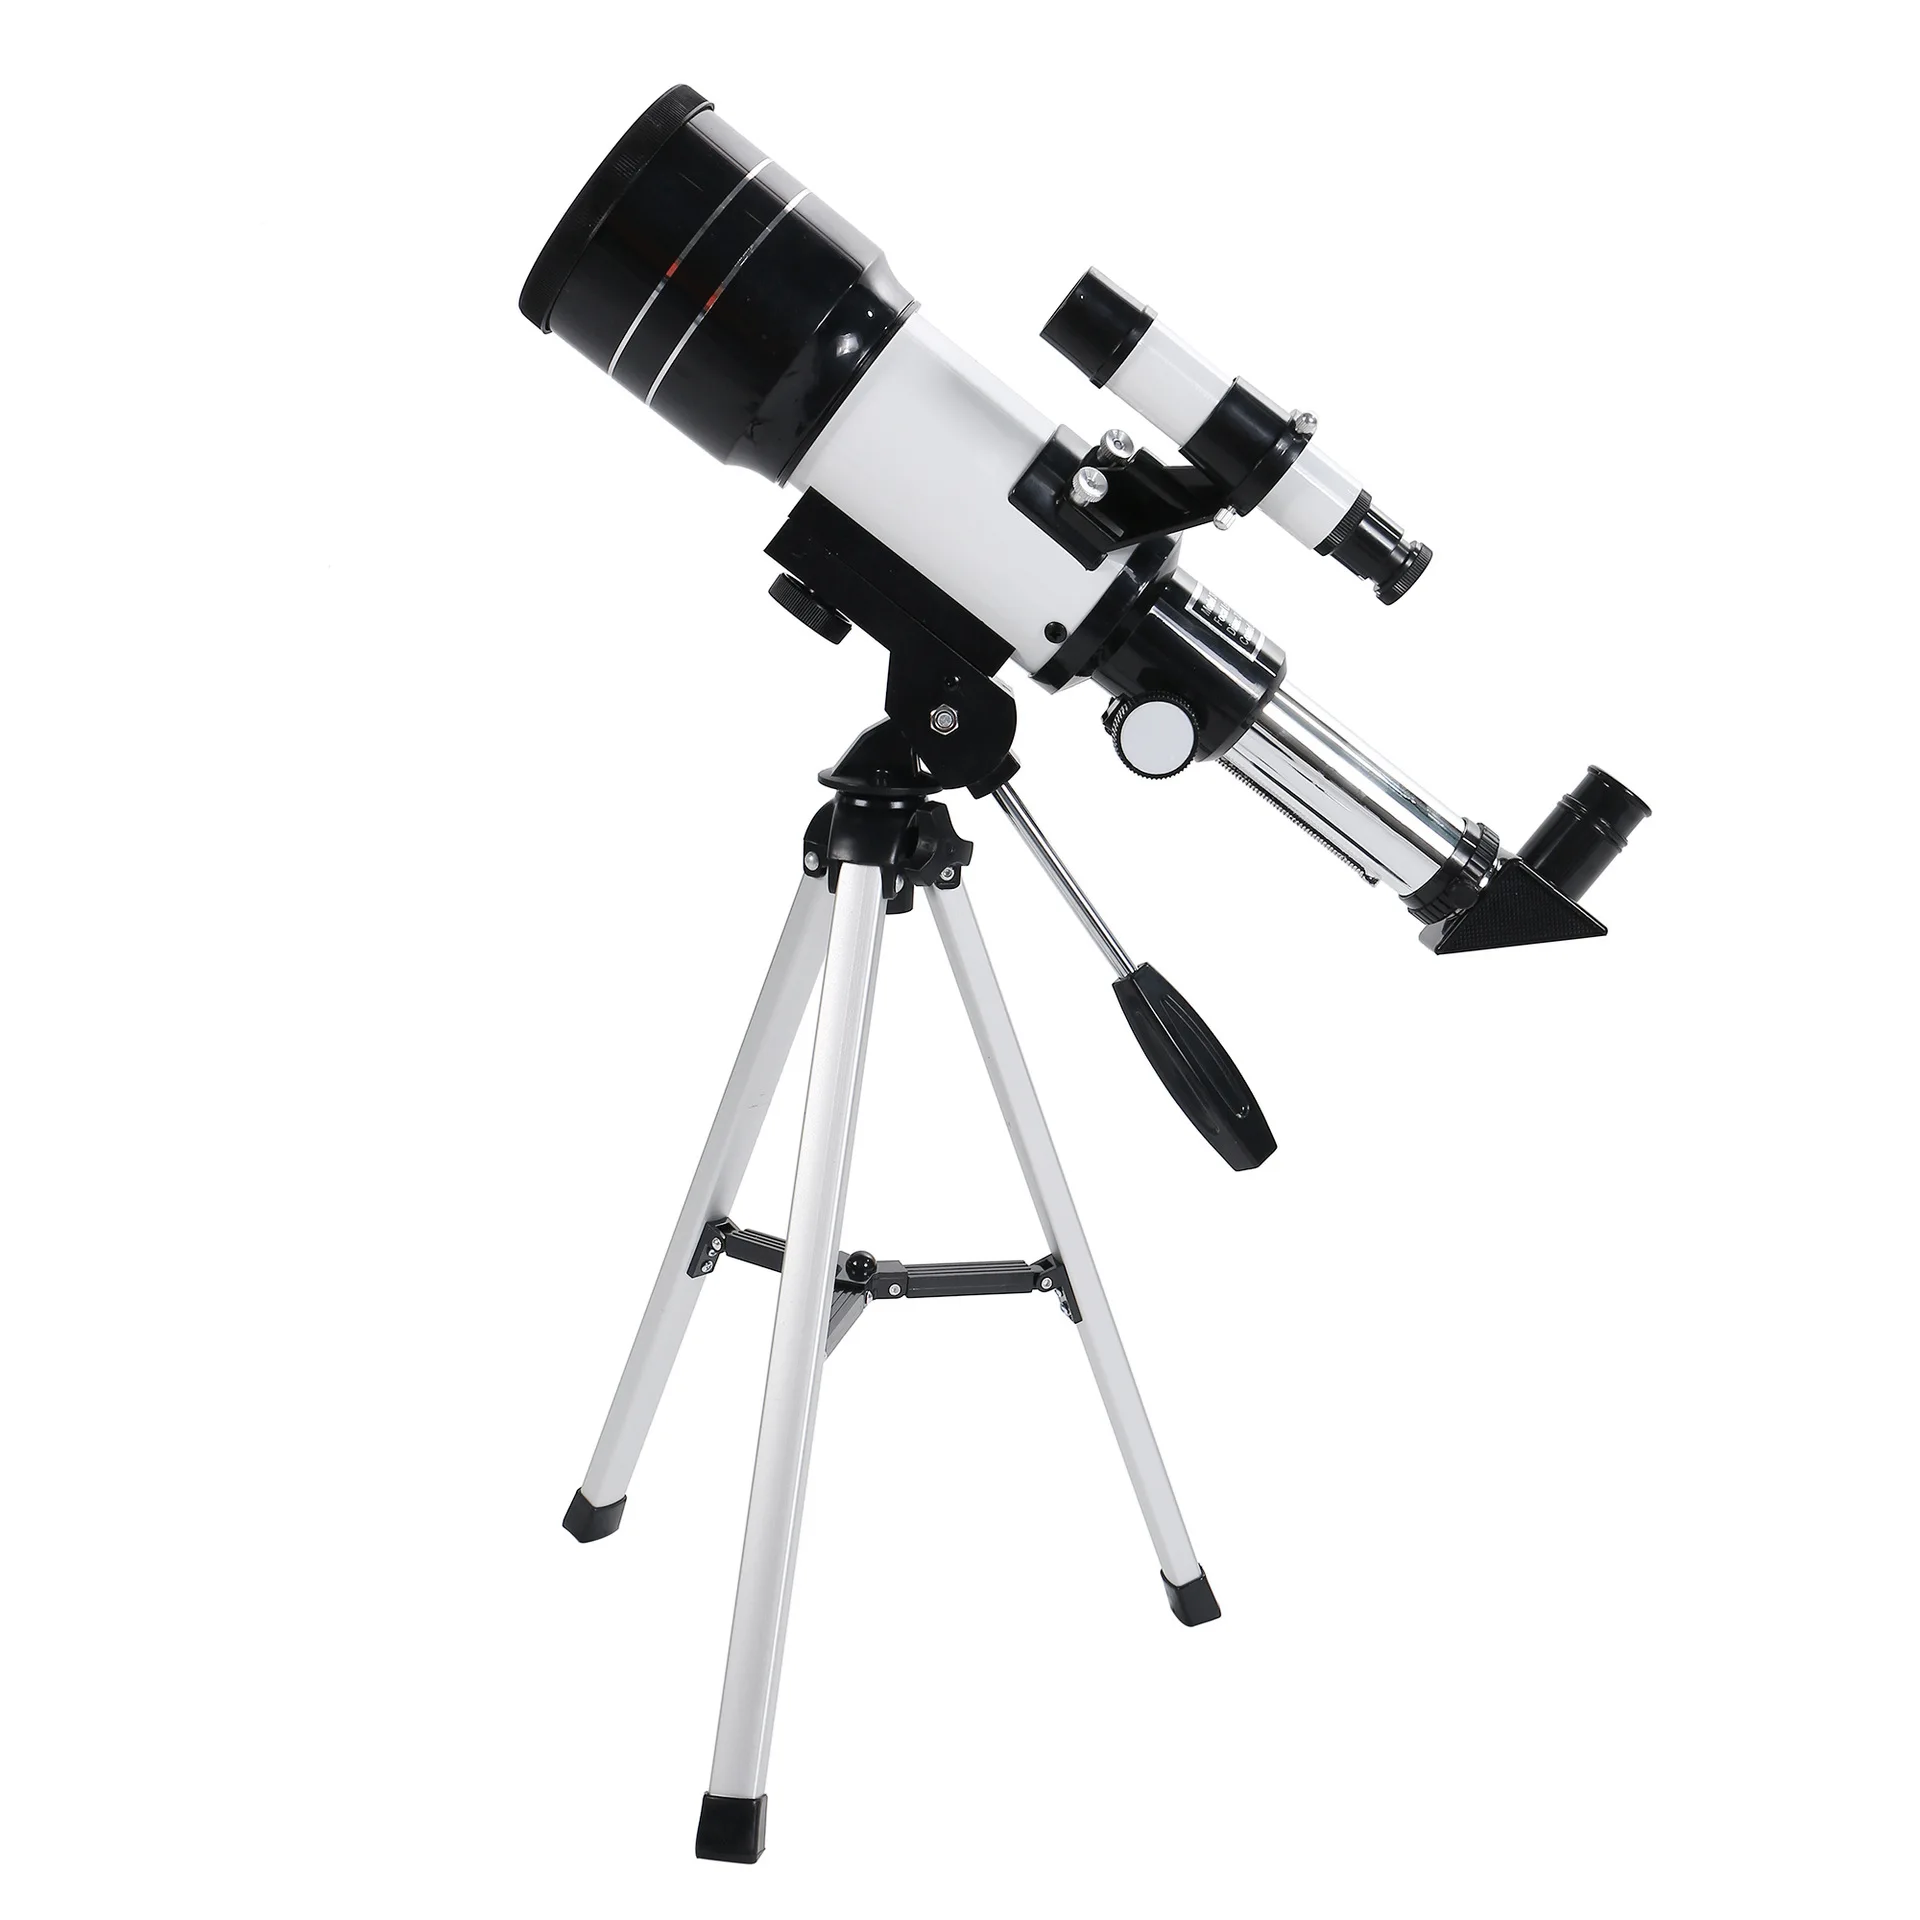 

Visionking Refraction Astronomical Telescope With Portable Tripod Sky Monocular Telescopio Space Observation Scope Outdoor